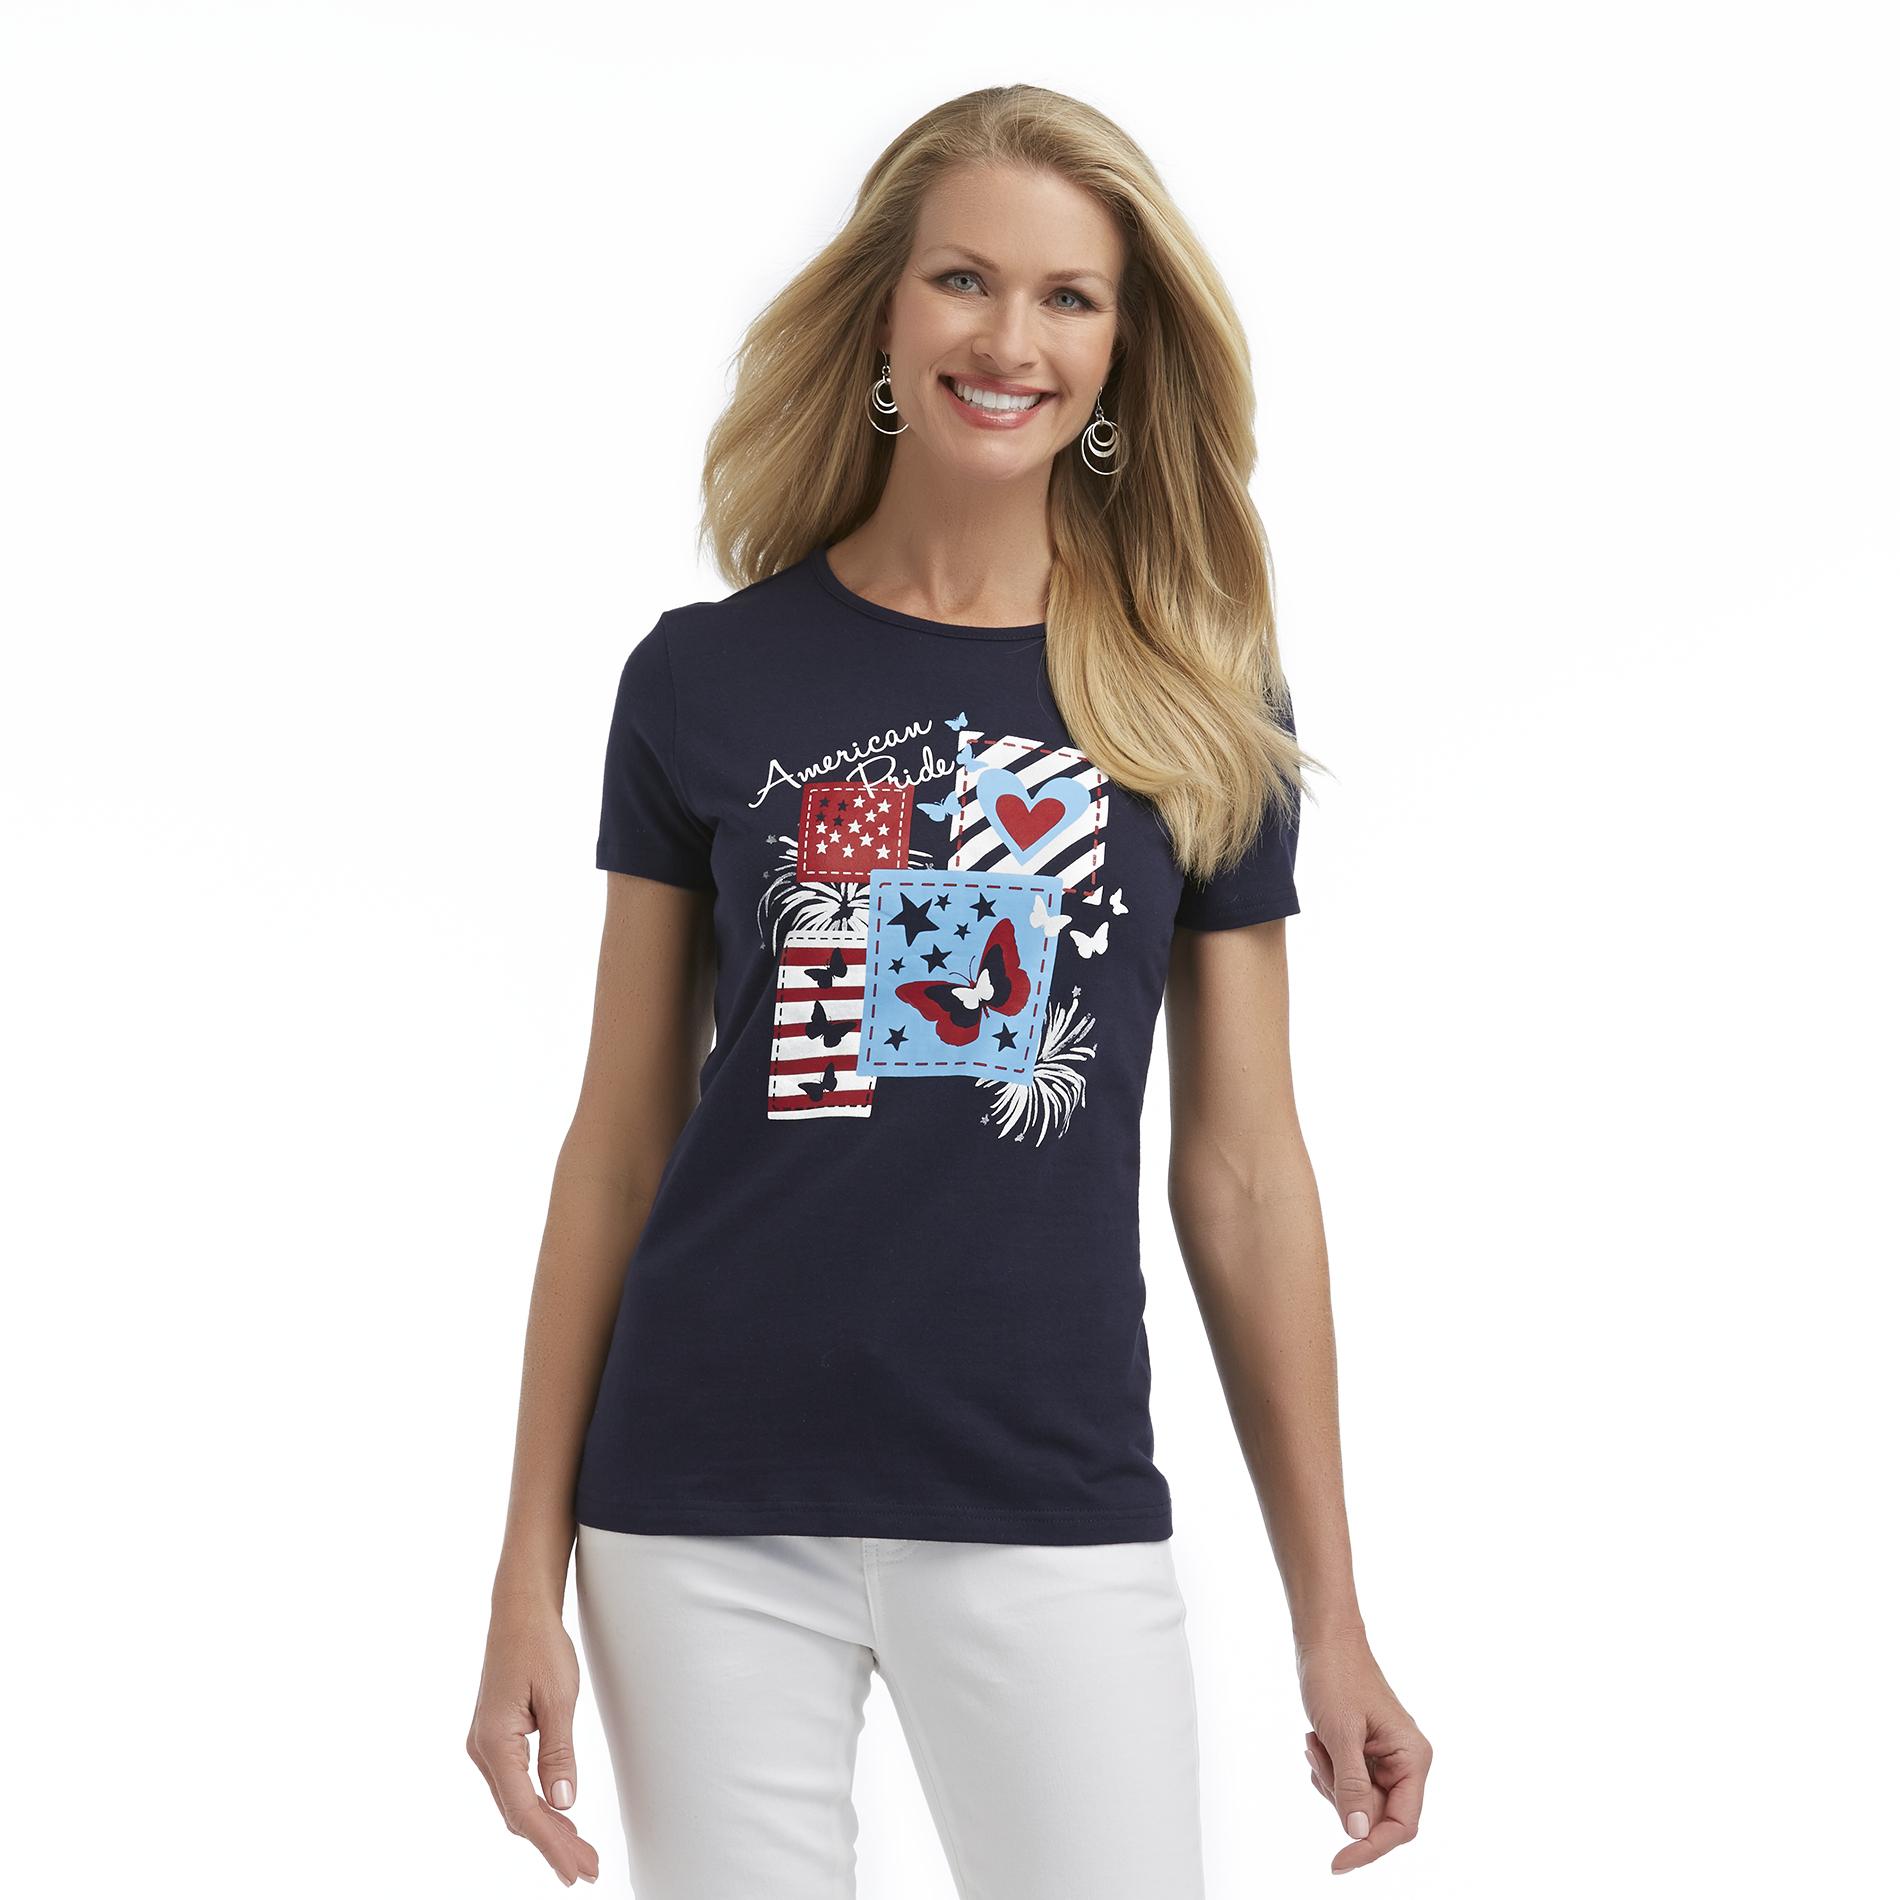 Holiday Editions Women's Graphic T-Shirt - American Pride